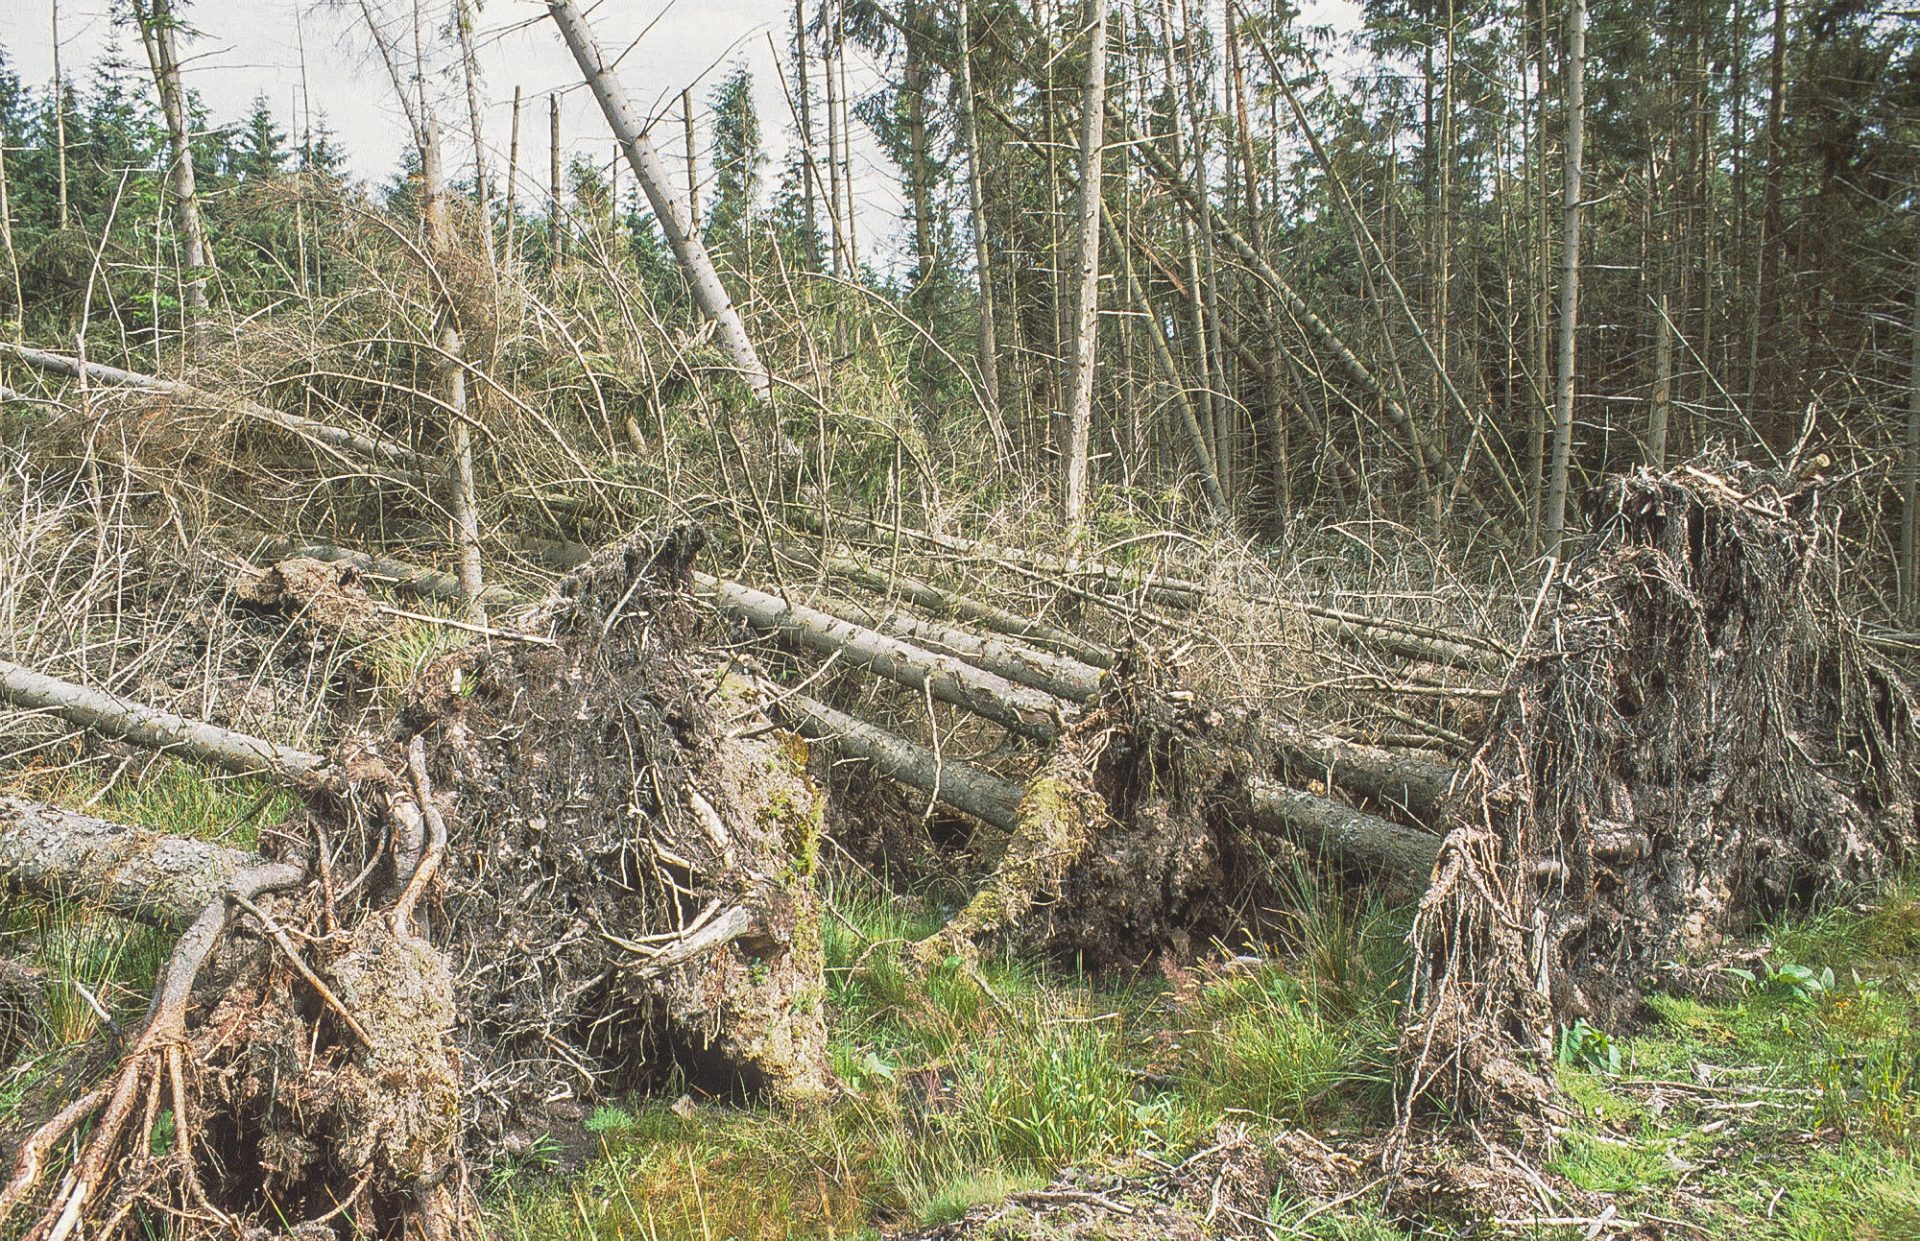 An example of wind damage in a forest, Sitka spruce trees lie on their side. 